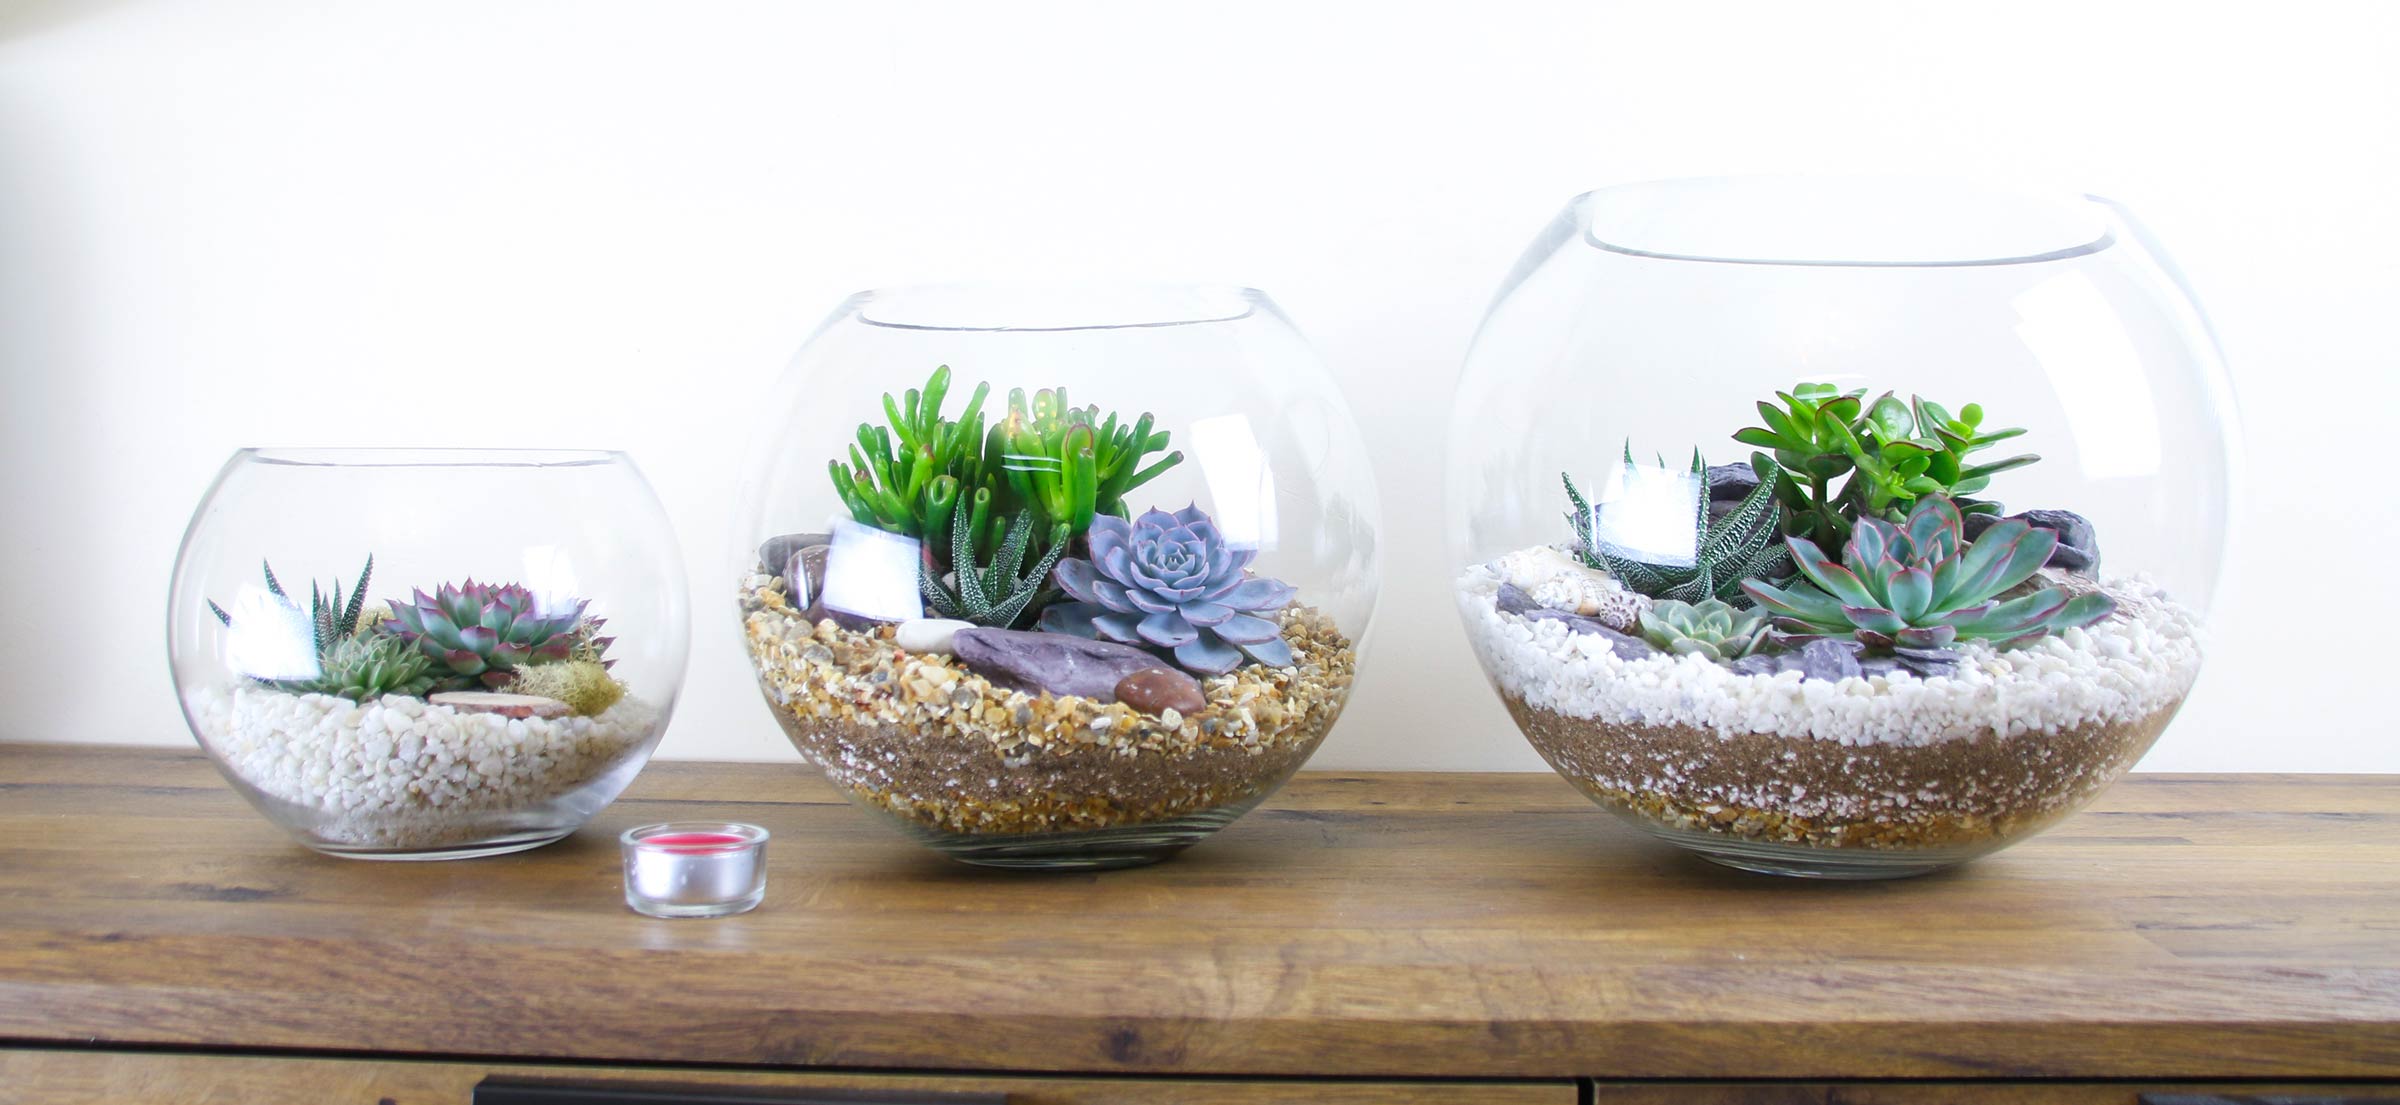 Open terrarium gifts for delivery in the UK